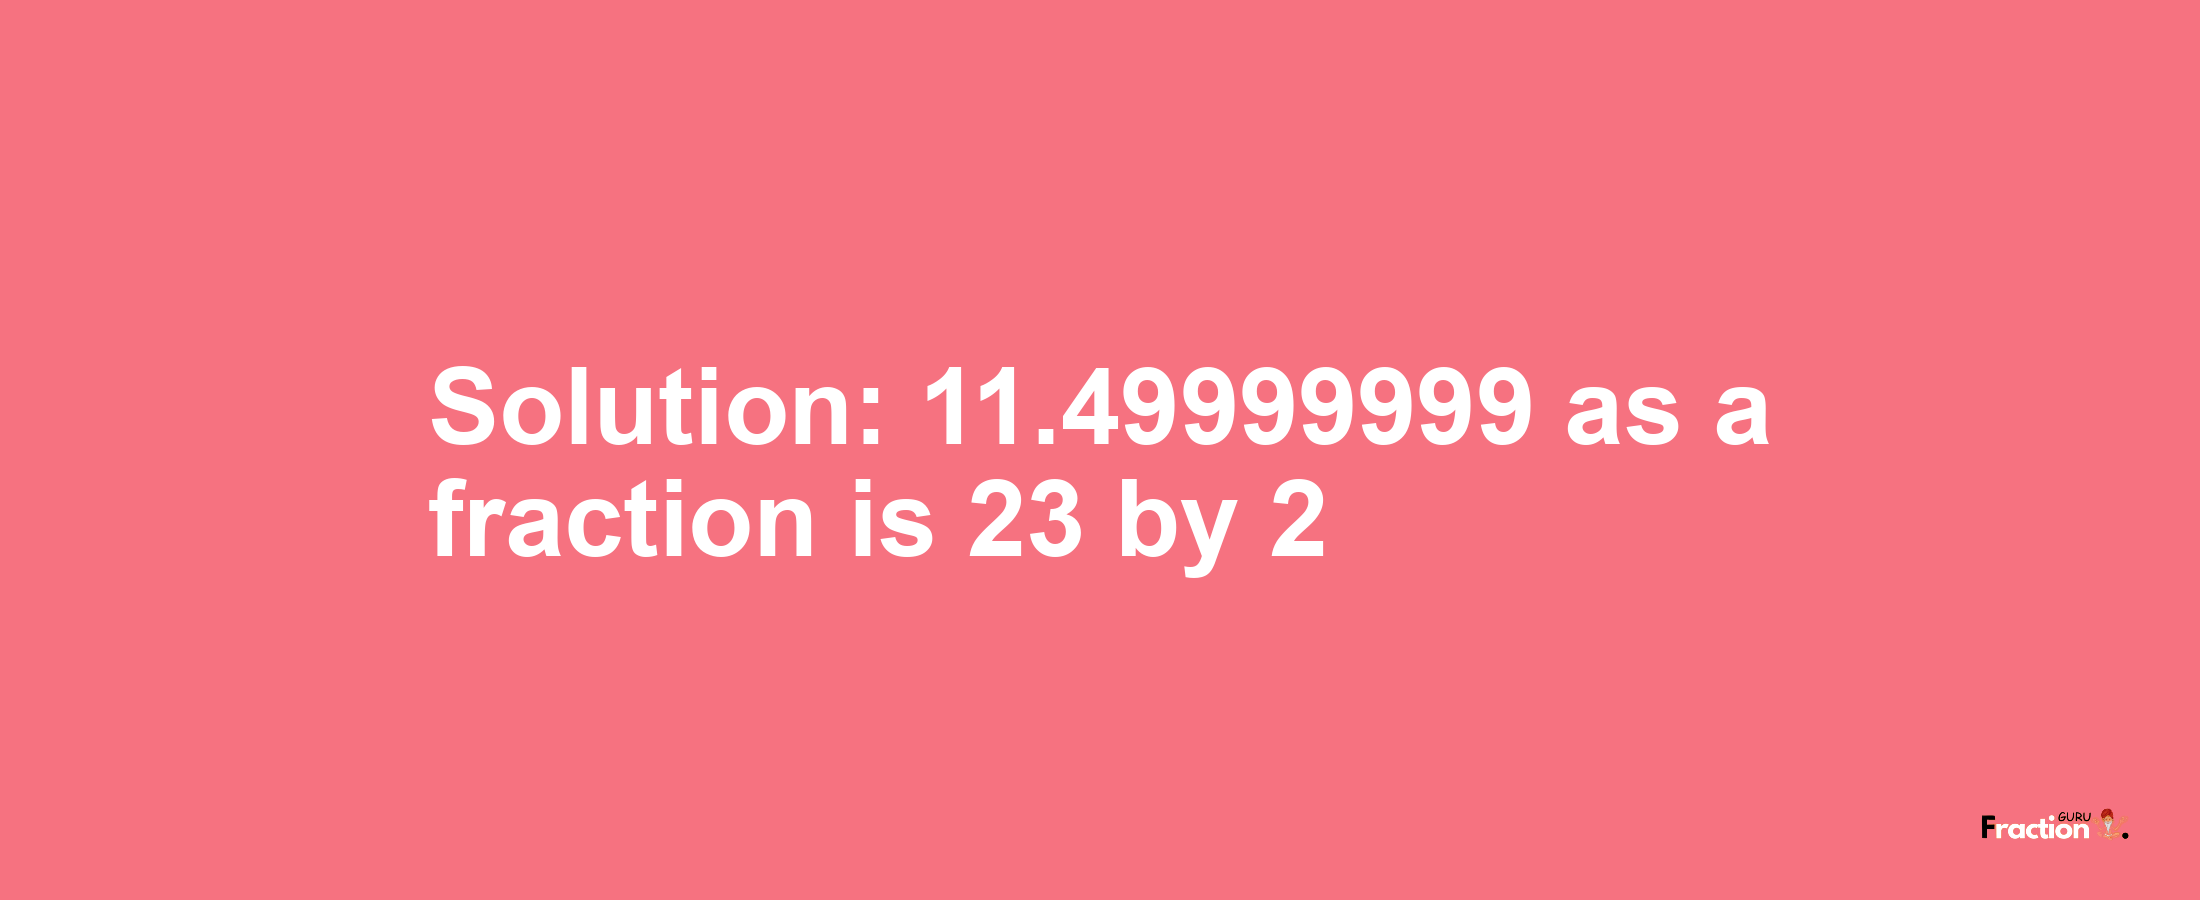 Solution:11.49999999 as a fraction is 23/2